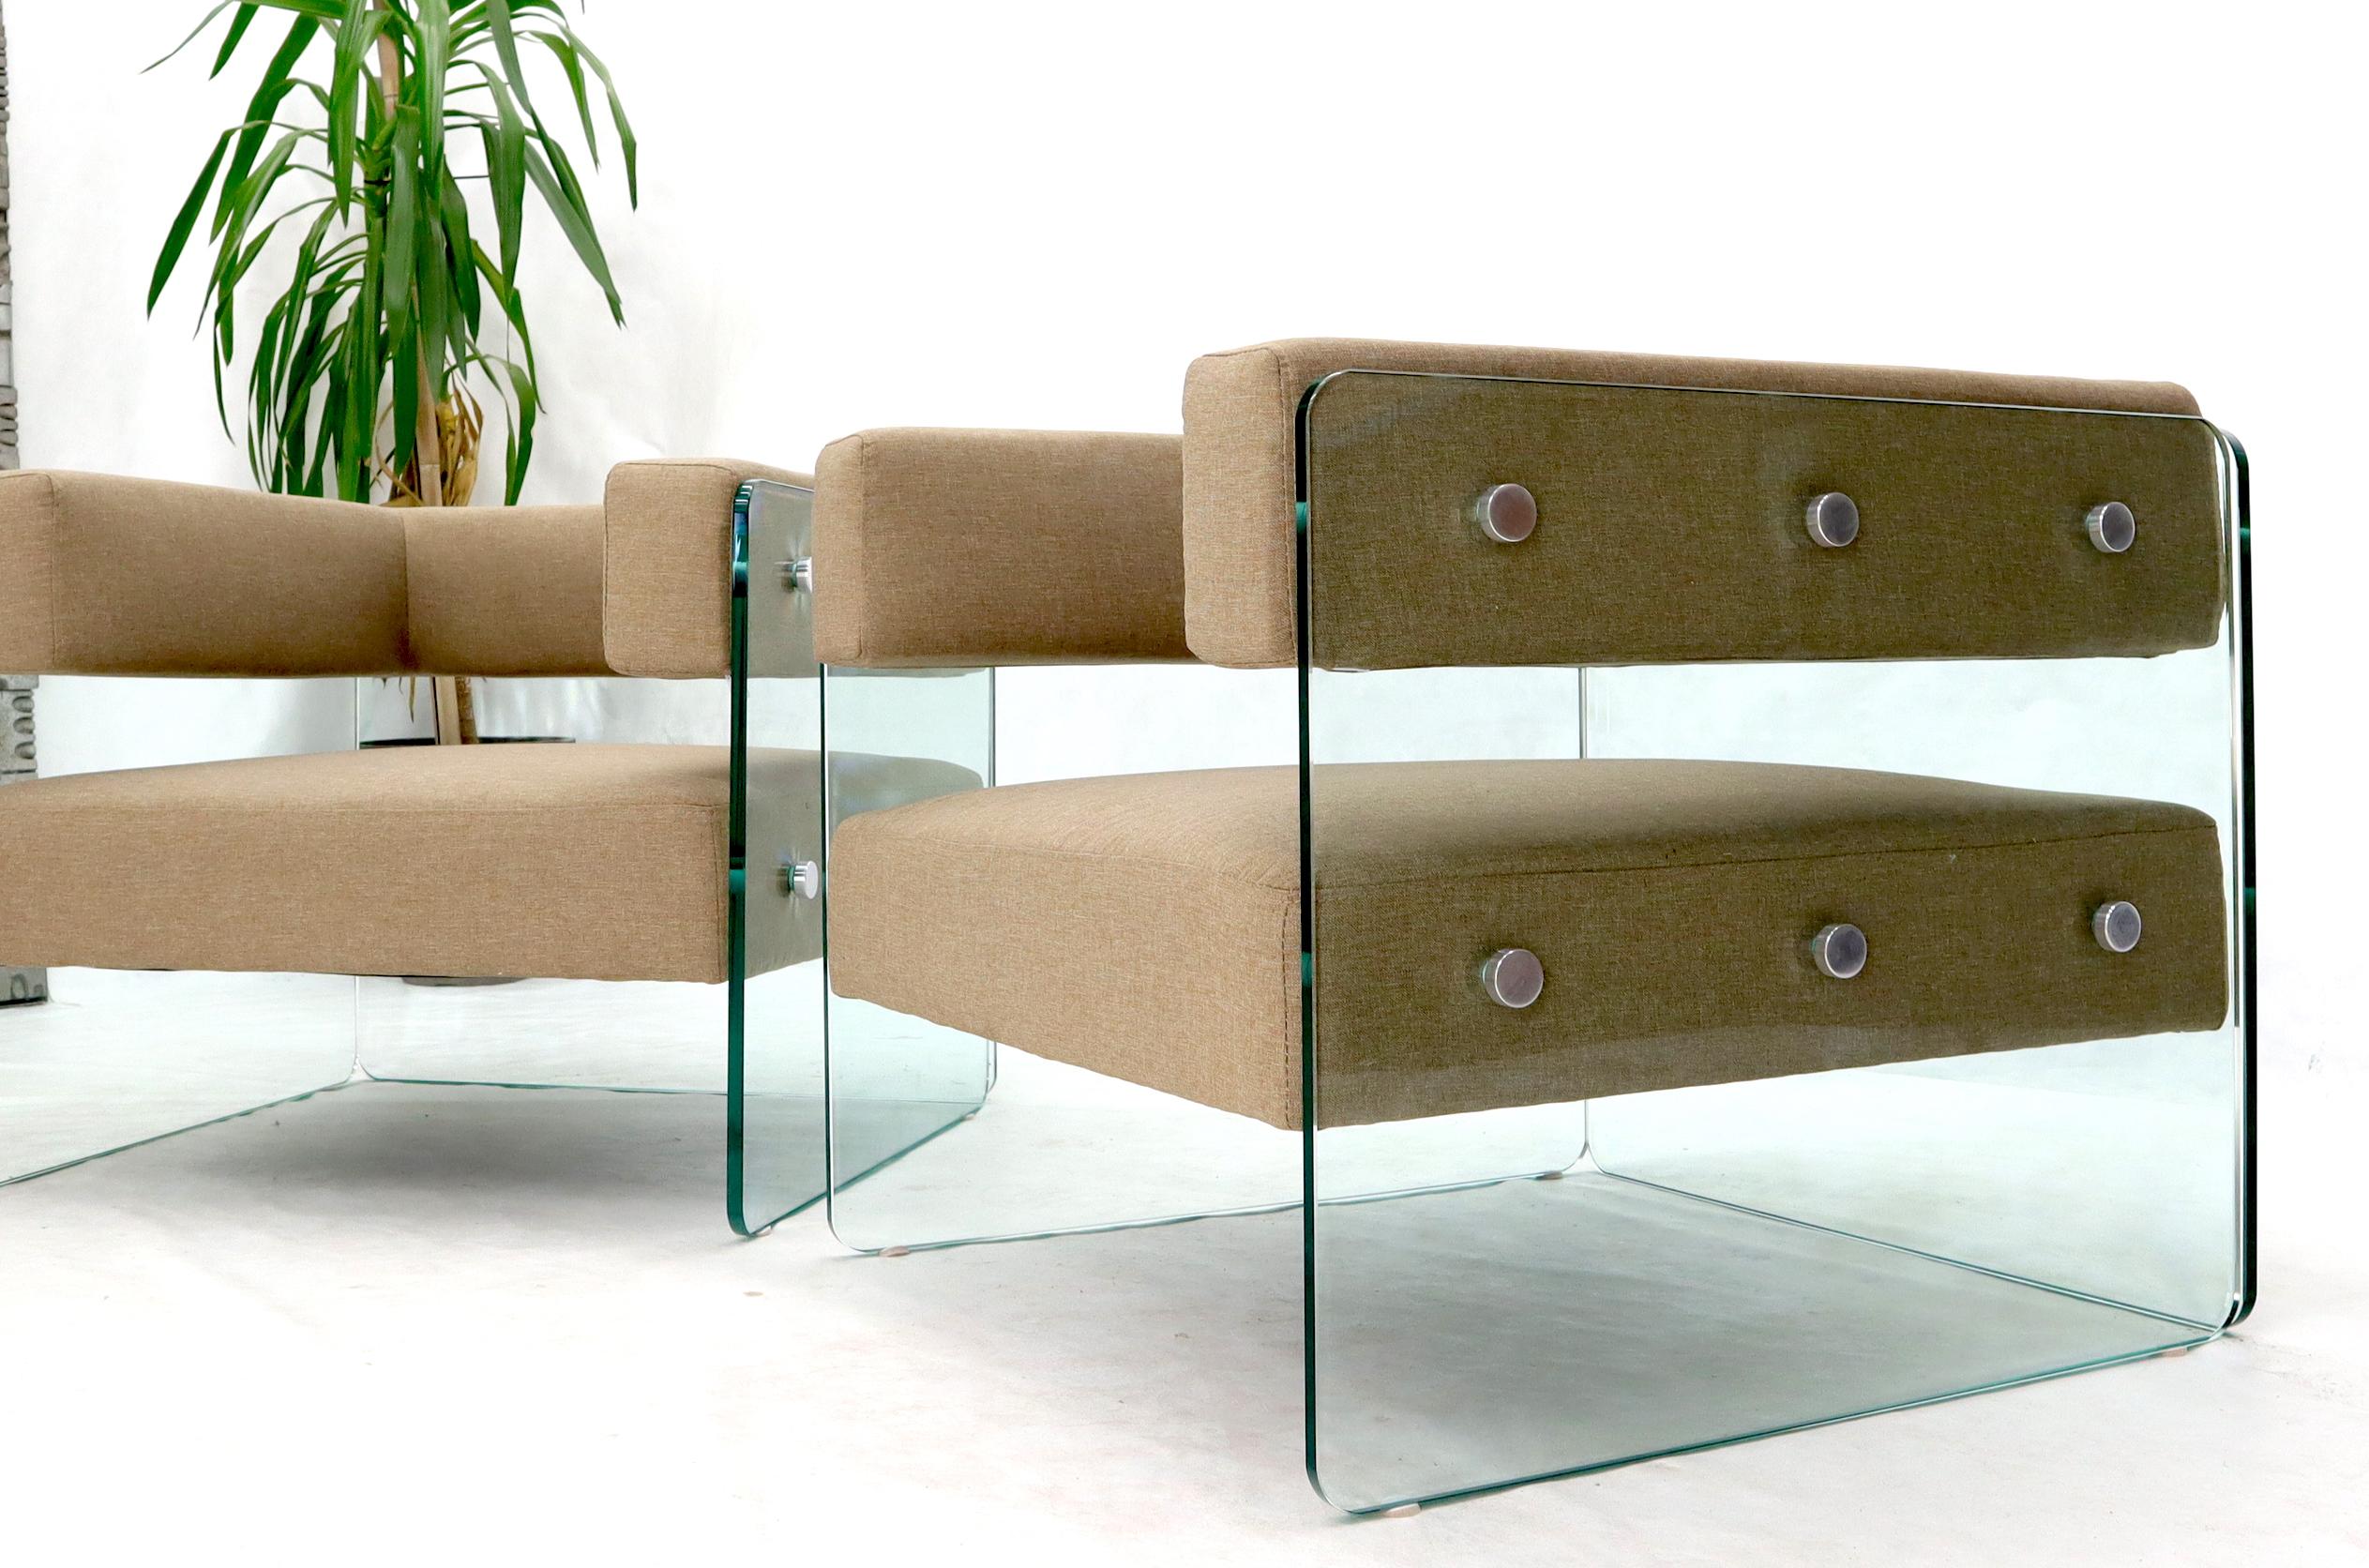 Pair of Mid-Century Modern glass panel design cube chairs.